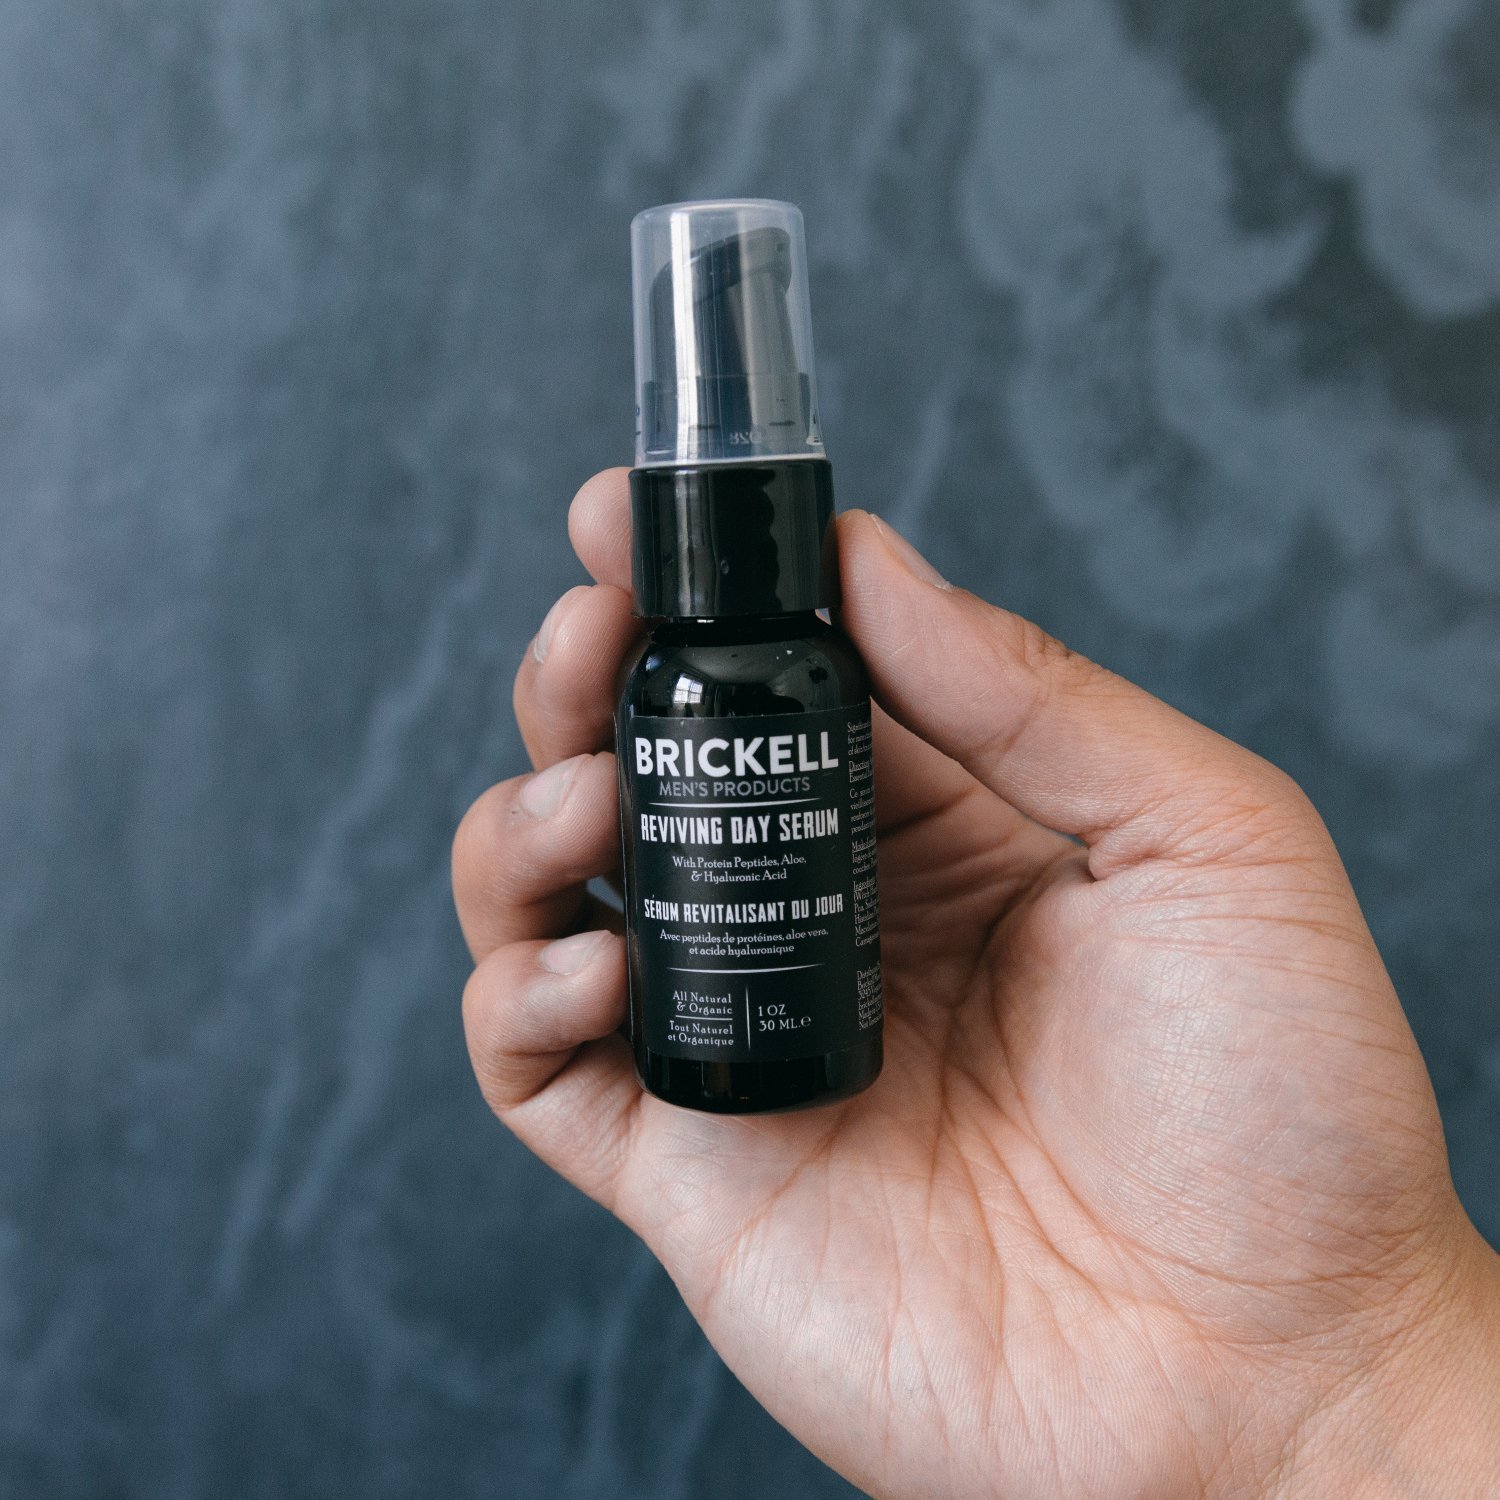 Brickell Mens Anti Aging Reviving Day Serum for Men, Natural and Organic Formulated with Hyaluronic Acid, Protein Peptides to Restore Firmness and Stimulate Collagen, 30 ml, Unscented